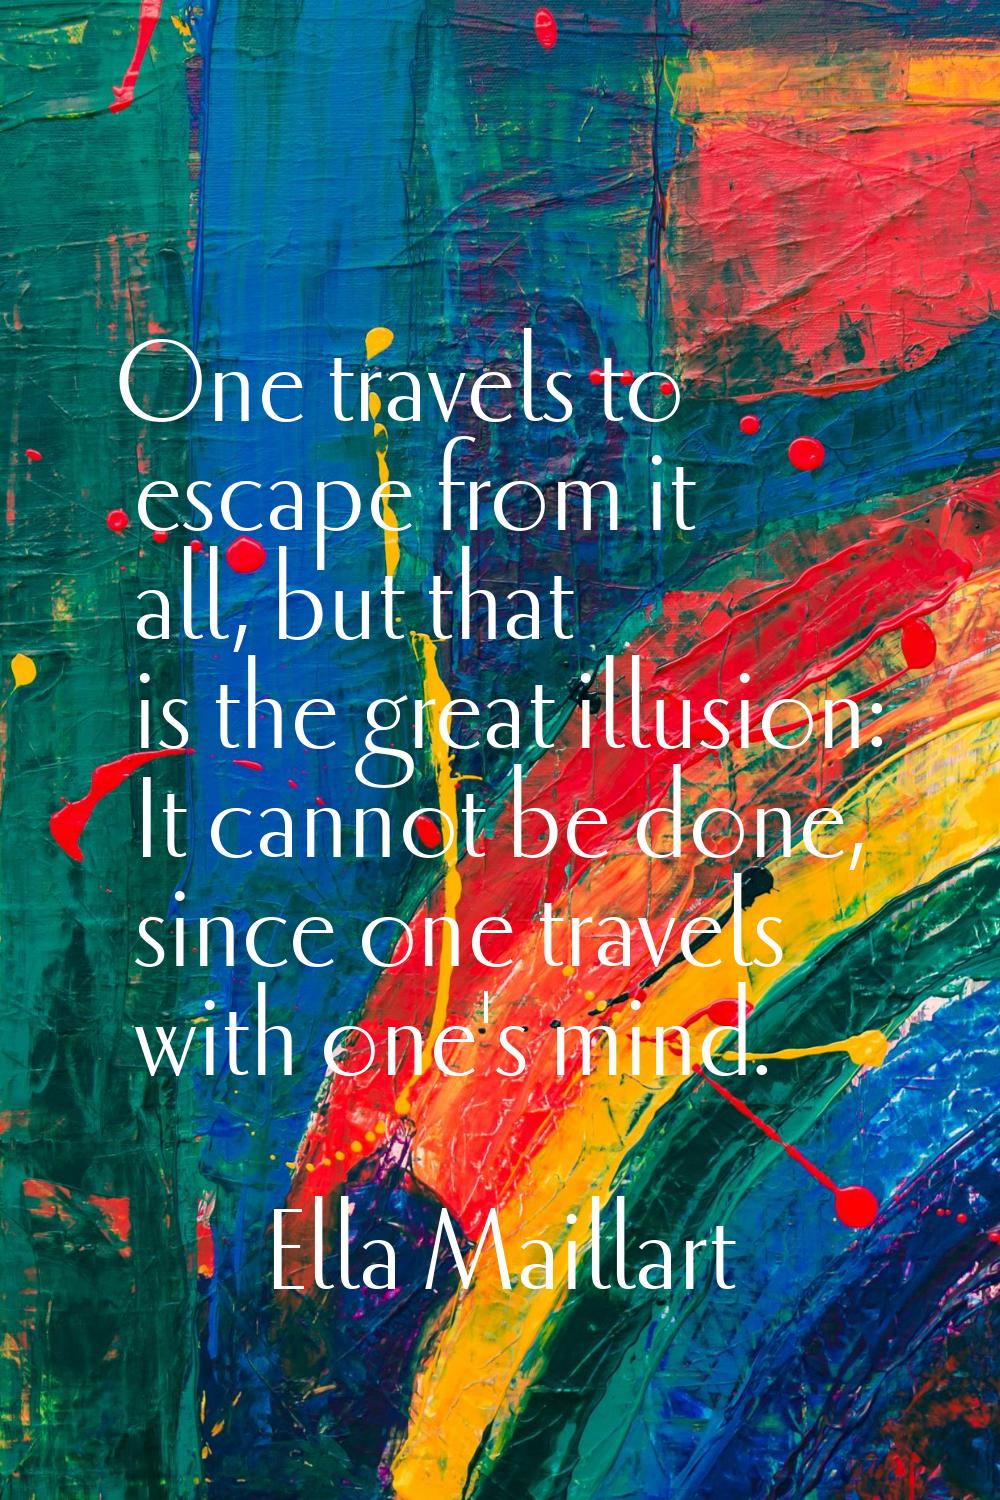 One travels to escape from it all, but that is the great illusion: It cannot be done, since one tra